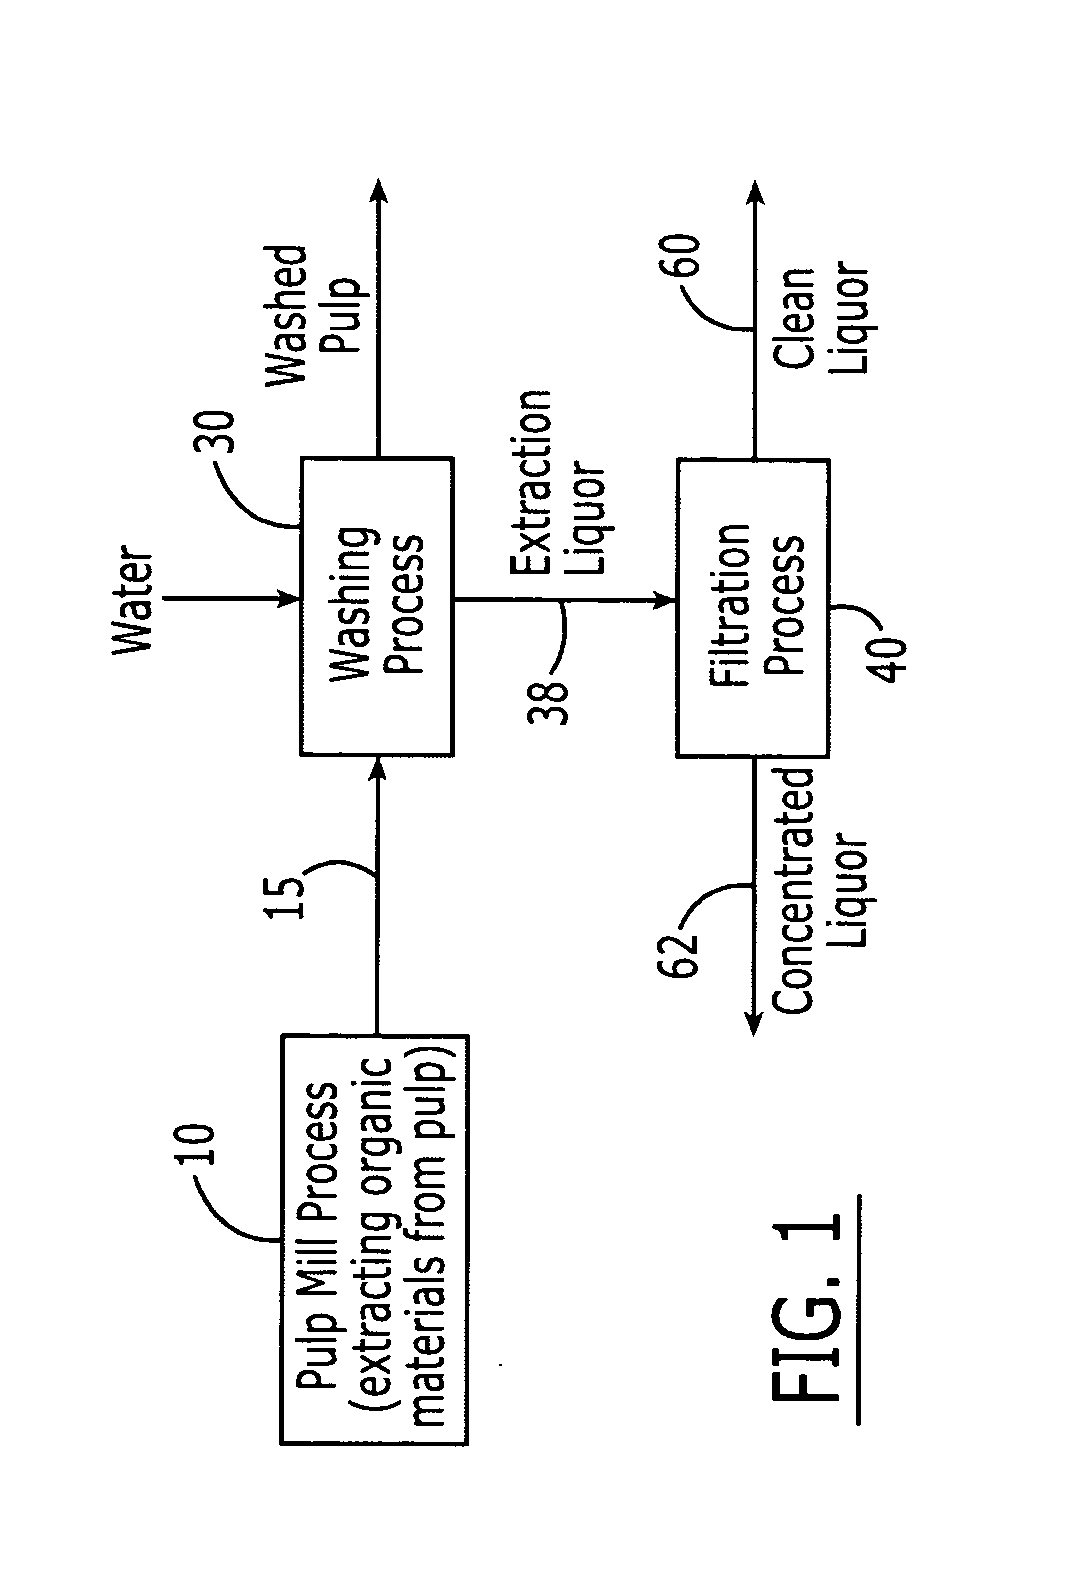 Method of concentrating pulp mill extracts